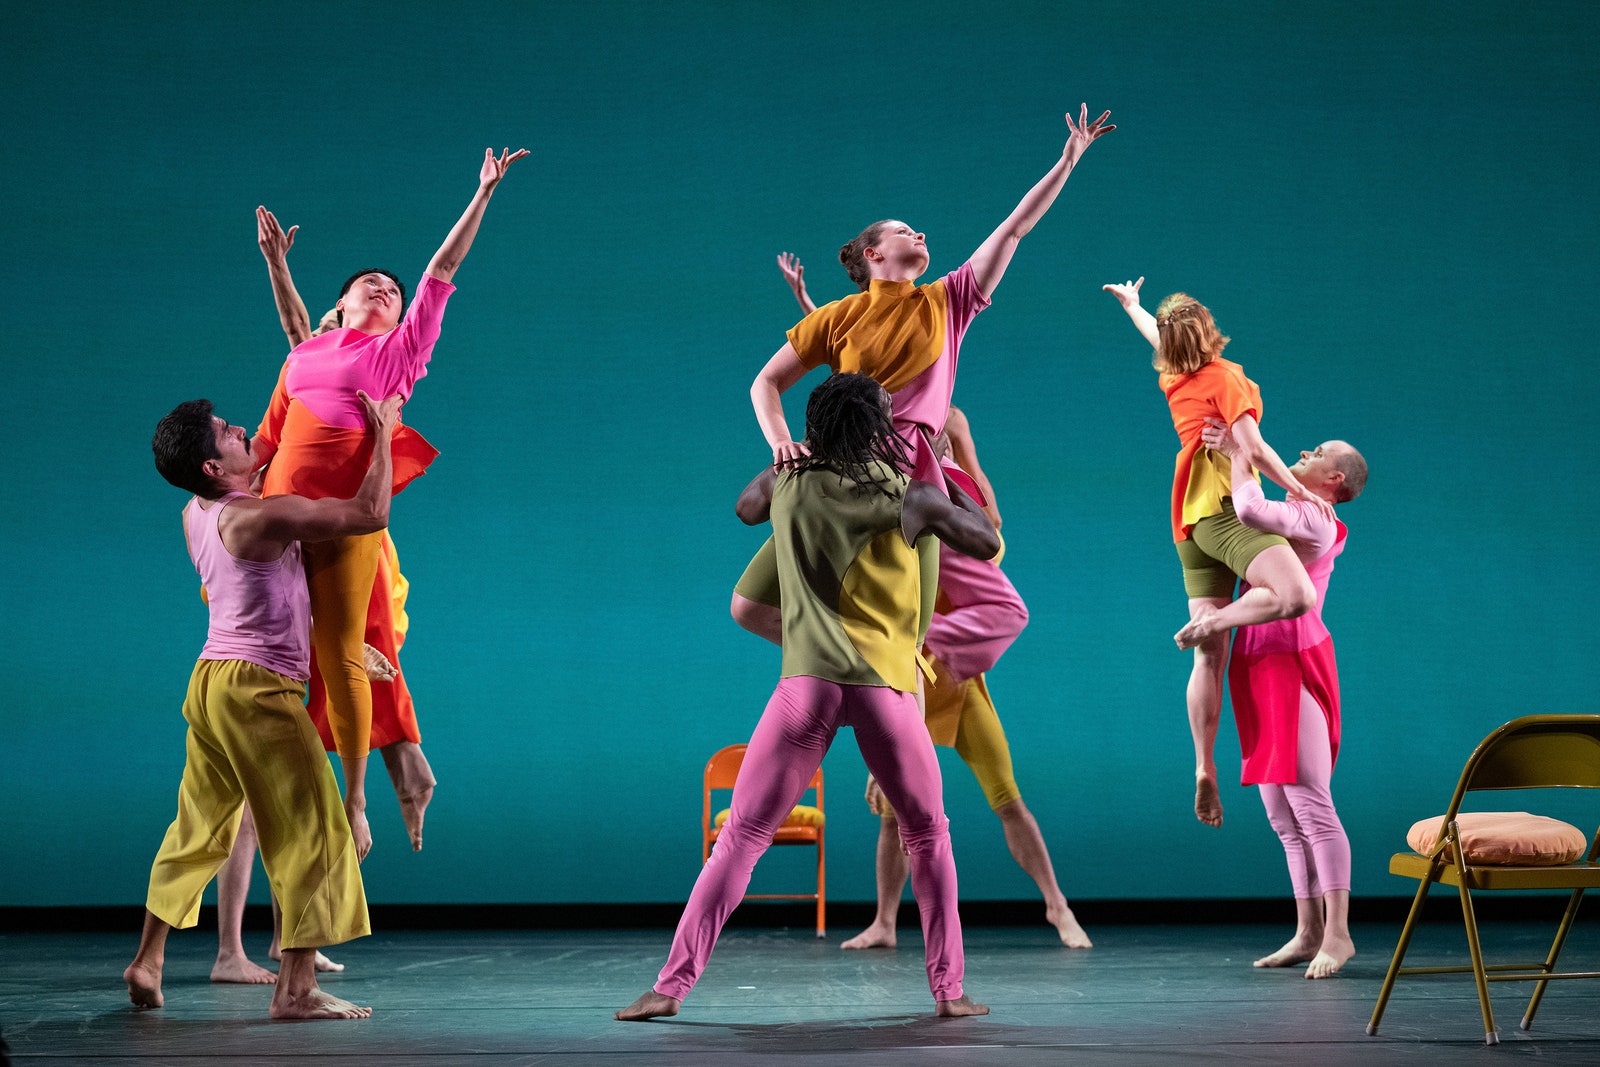 Dancers in multicolored costumes perform on a stage.